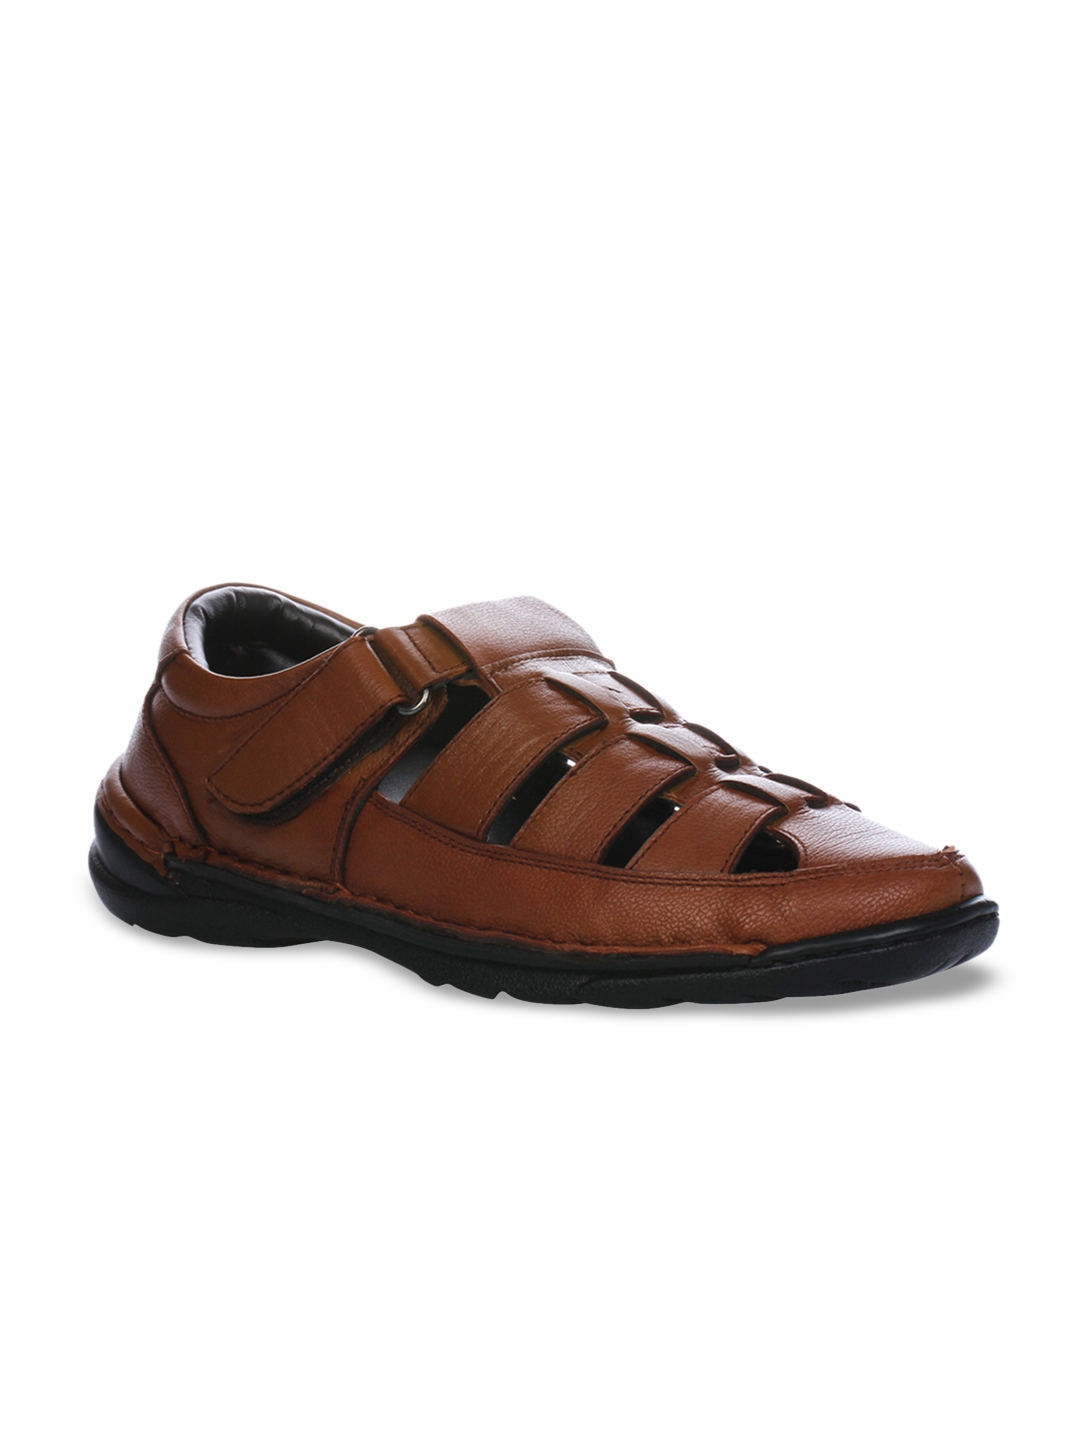 liberty leather sandals for mens